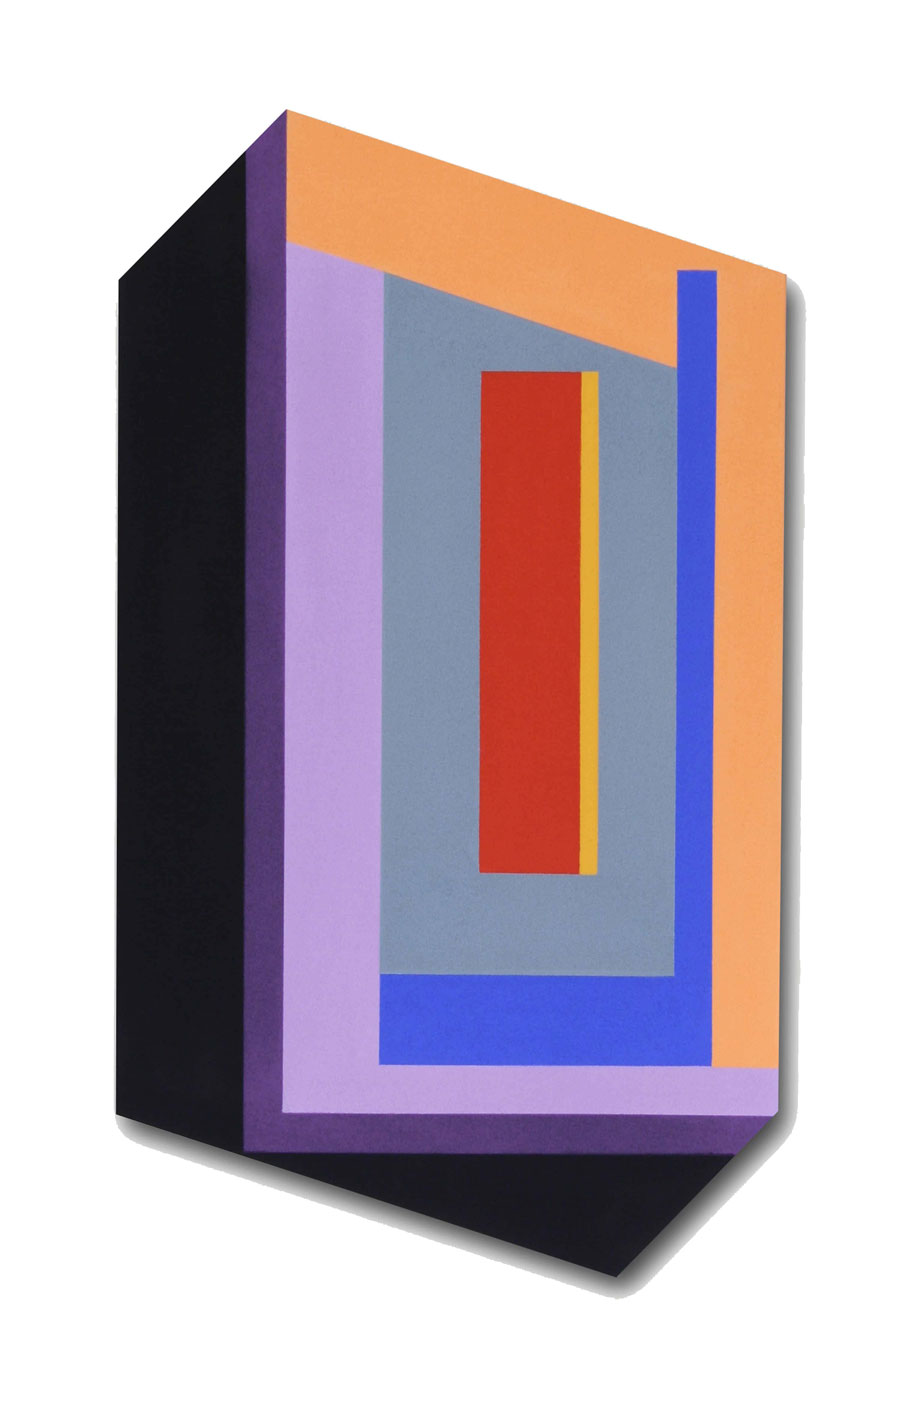 Concentric, colorful rectangles that give the effect of an illogical three-dimensional portal on a prism-shaped canvas.